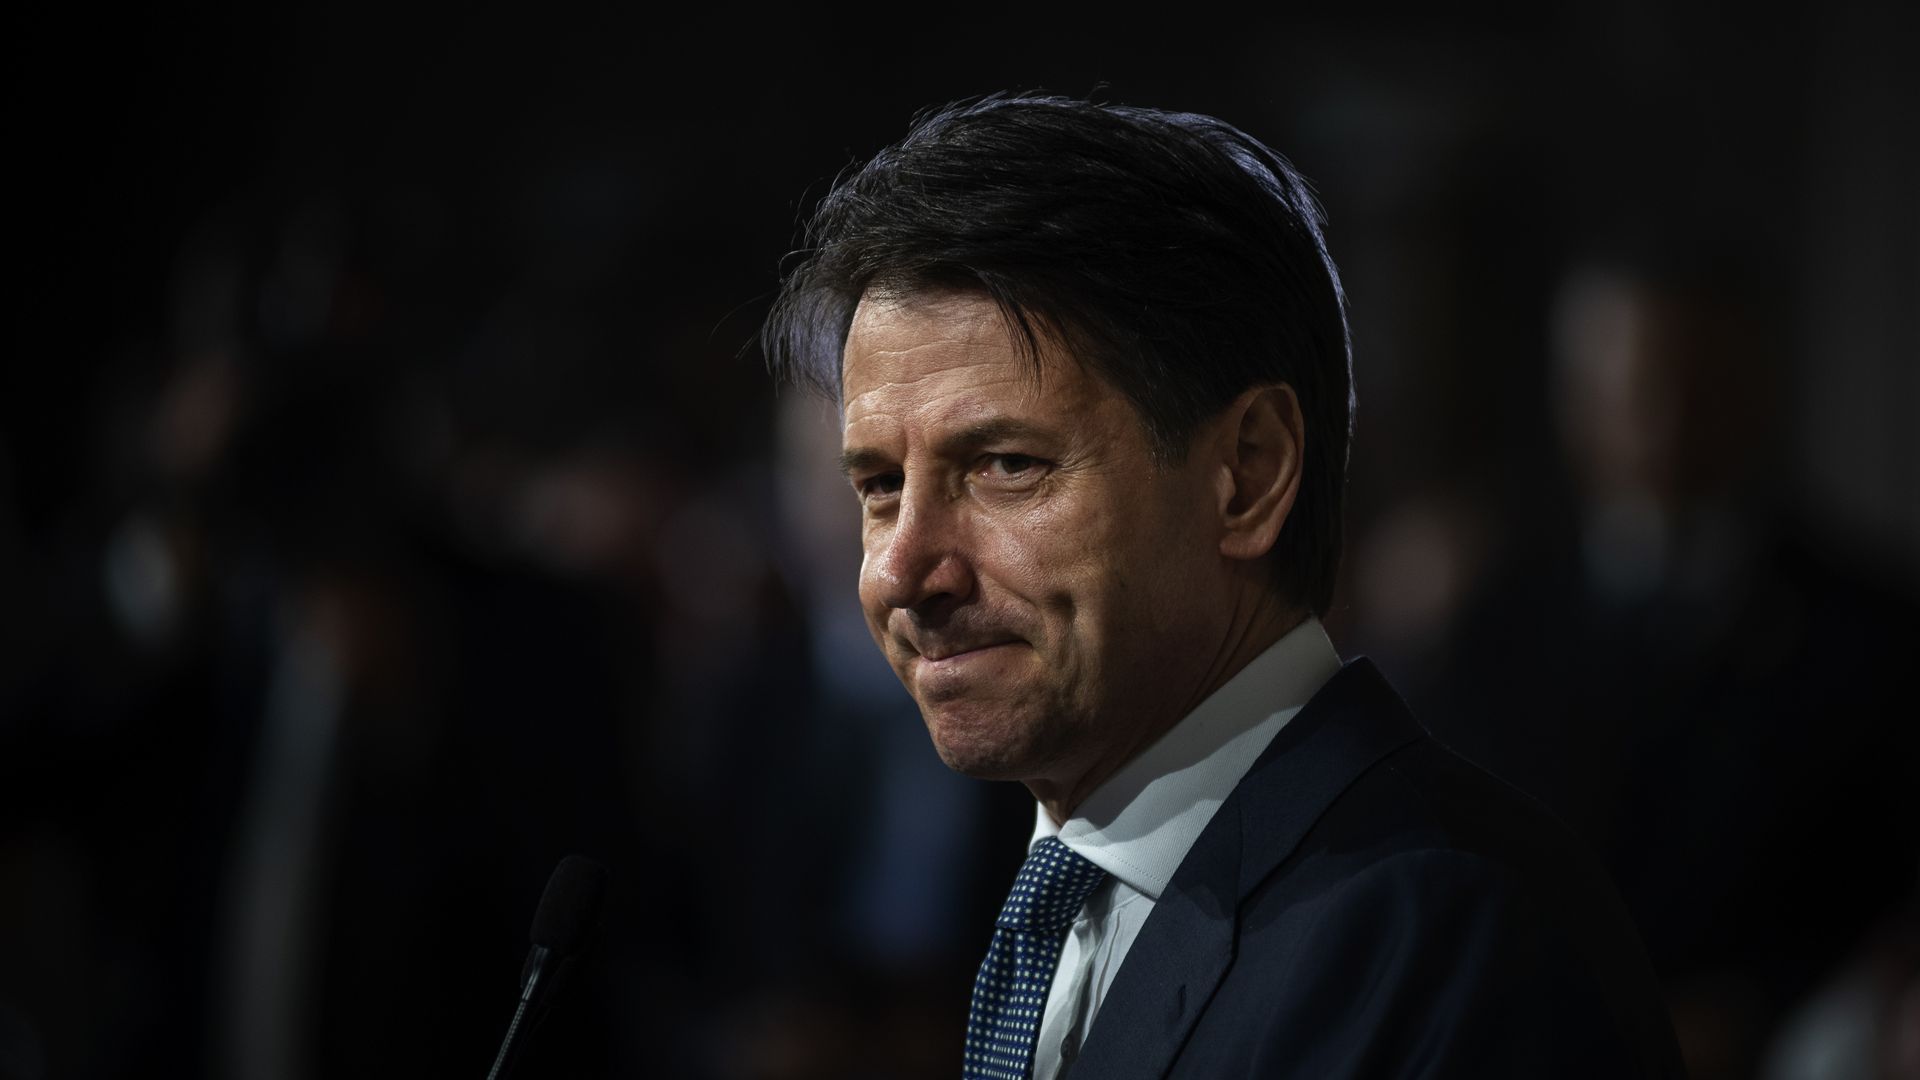 Giuseppe Conte, Italy's new prime minister designate, speaks to the press after being appointed 